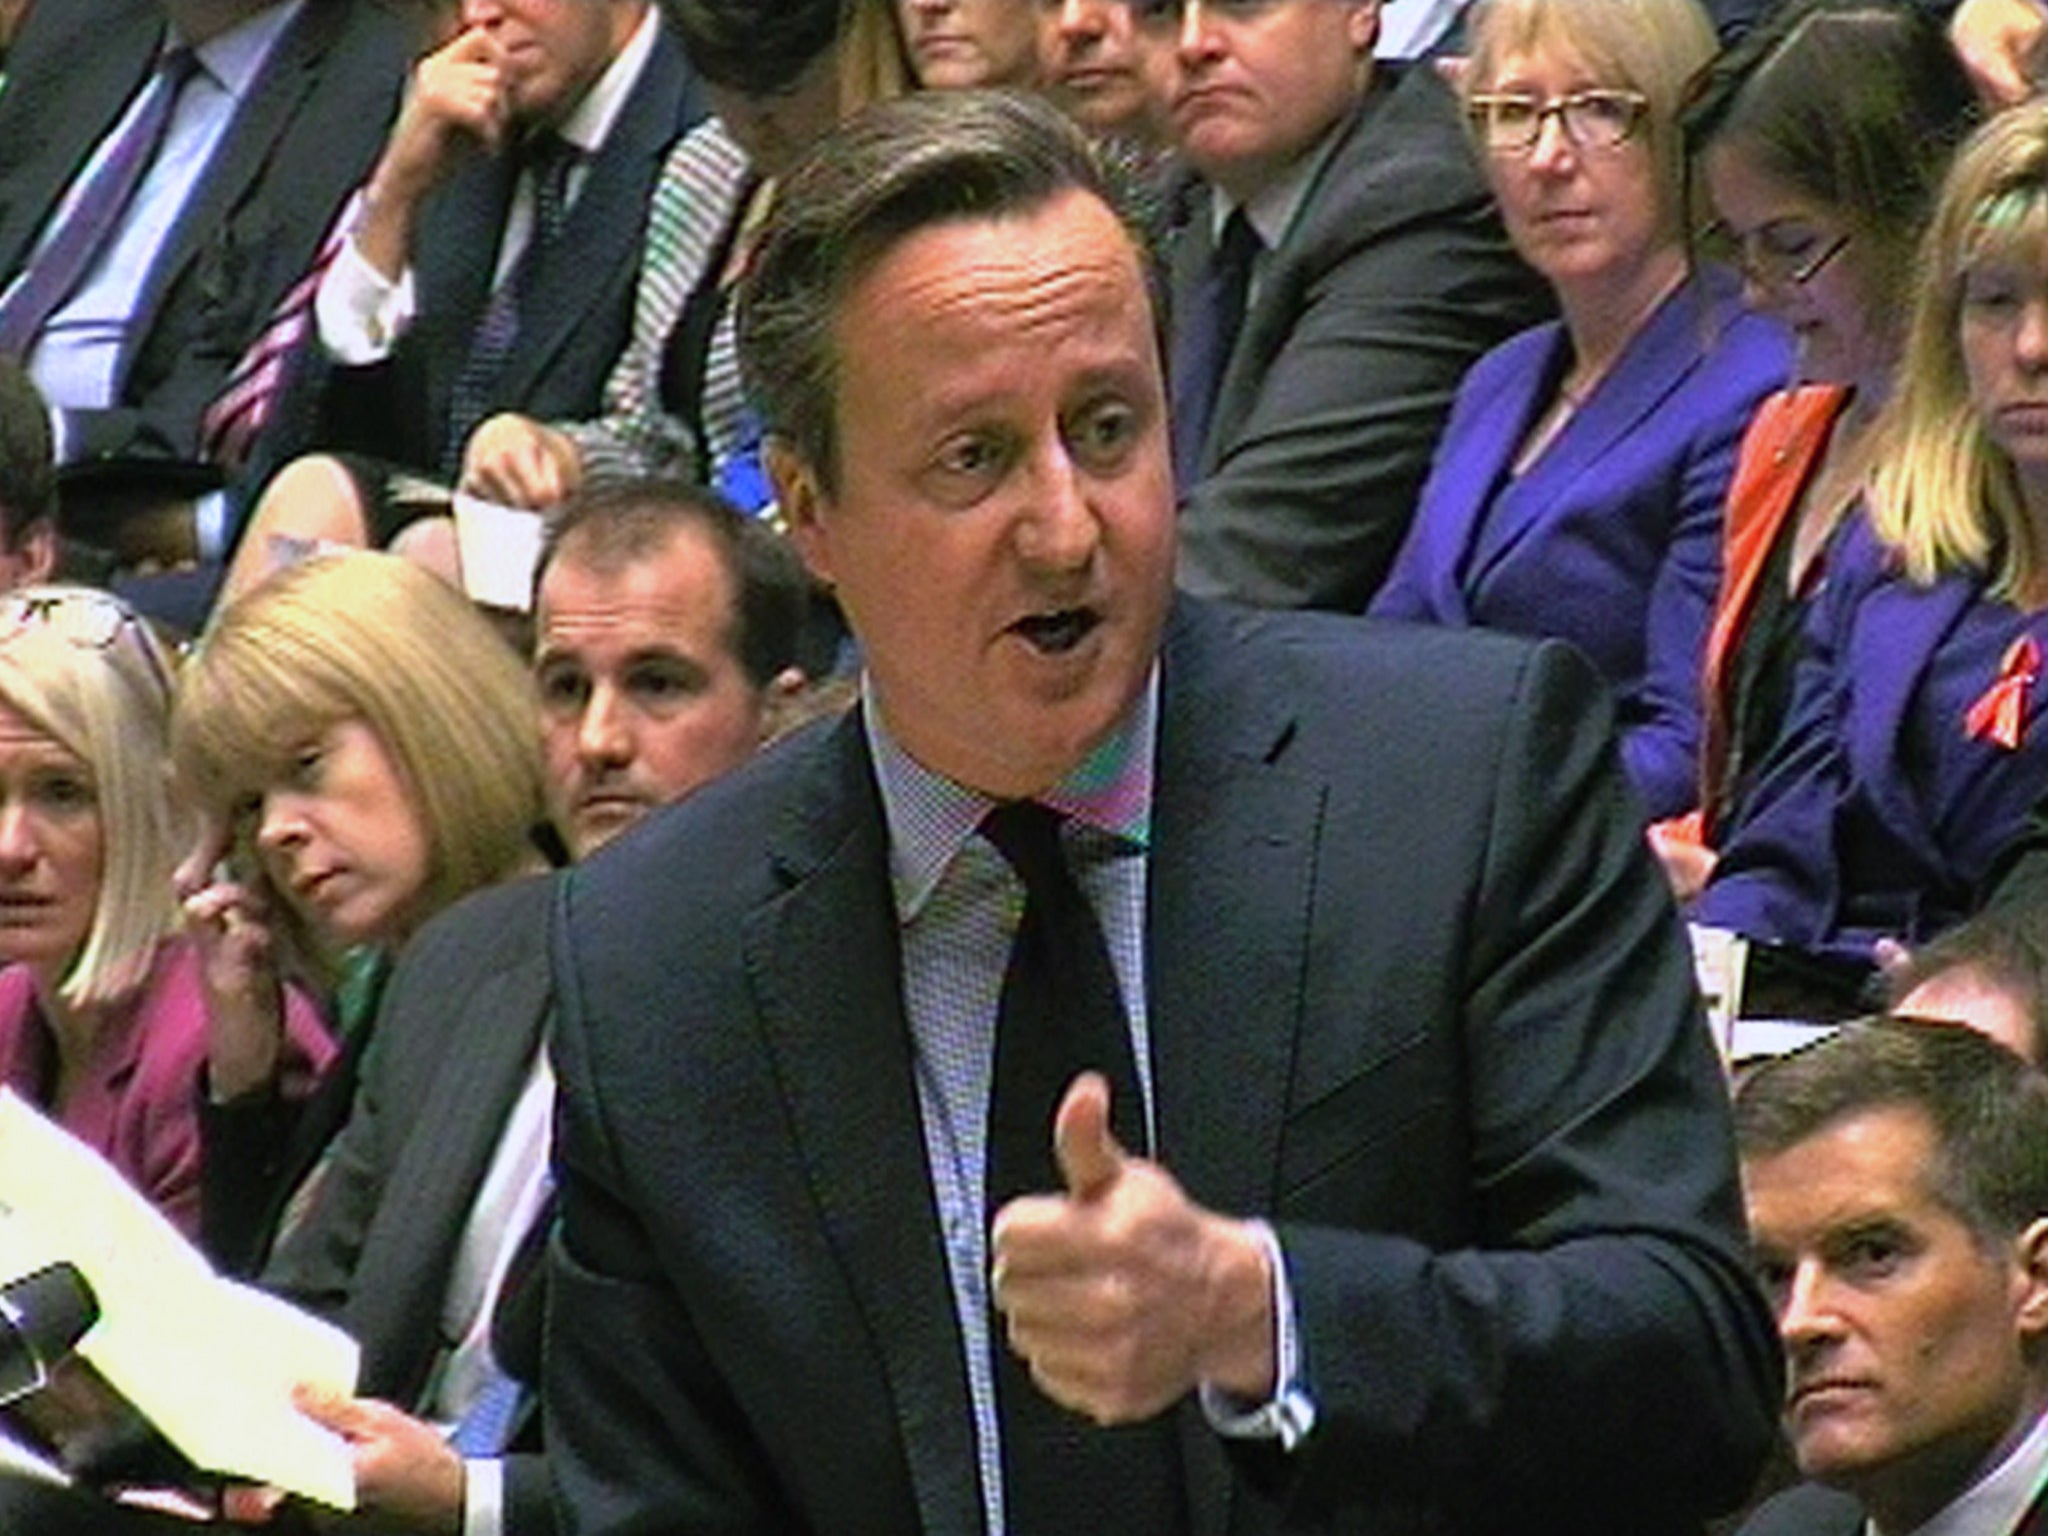 David Cameron said the Autumn Statement would deliver more funding to women’s charities that fight domestic violence